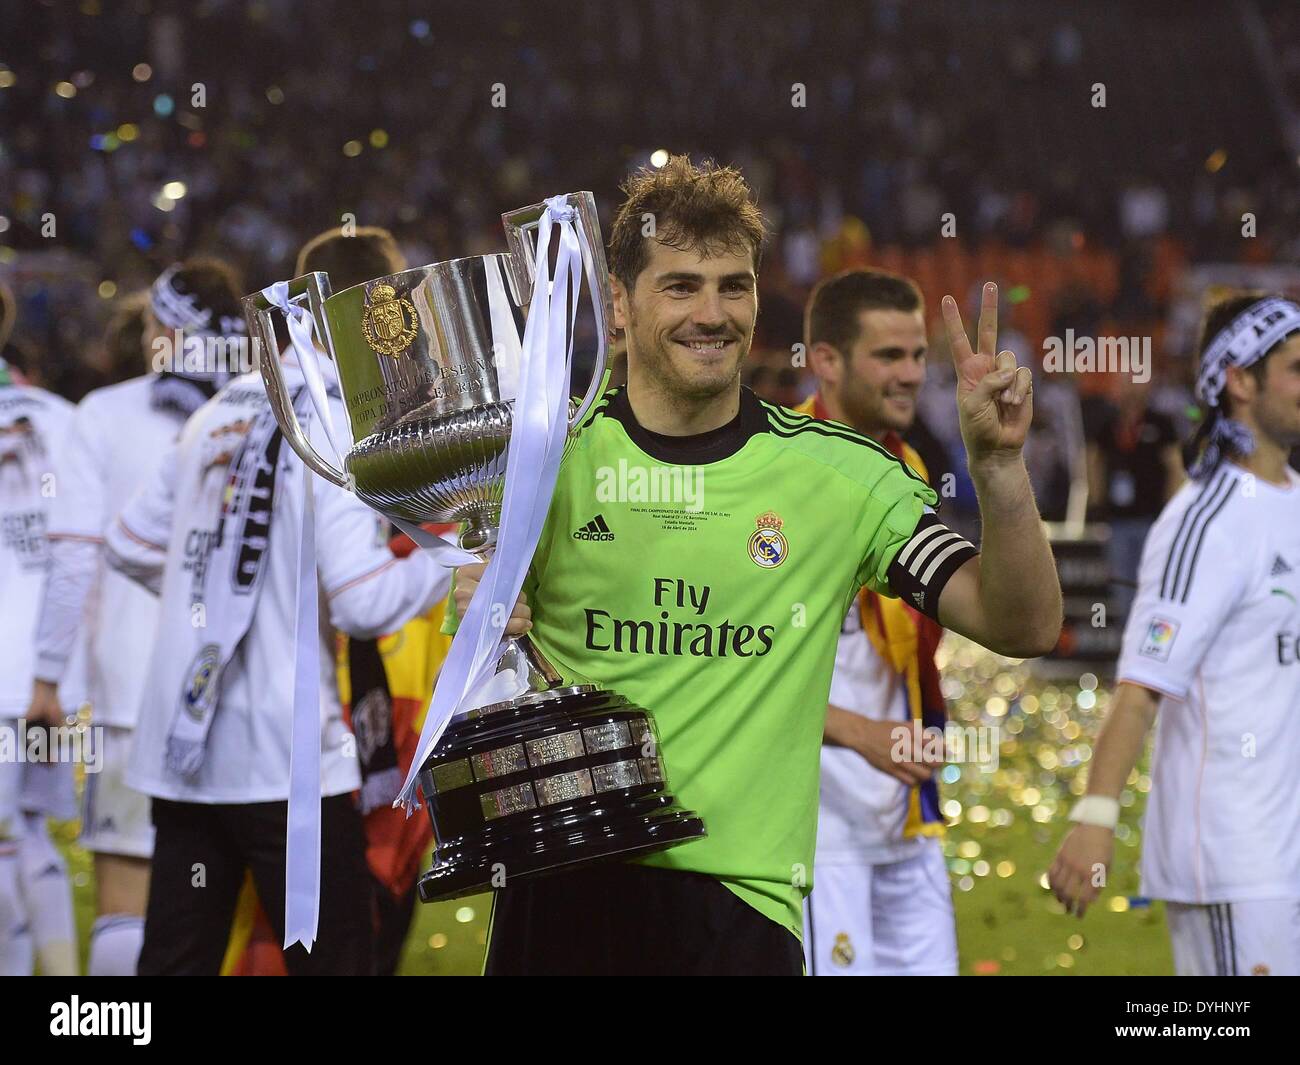 Mestalla, Valencia, Spain. 16th Apr, 2014. Copa Del Rey Cup final. Barcelona versus Real Madrid. Iker Casillas (Real Madrid) celebrates with the cup © Action Plus Sports/Alamy Live News Stock Photo